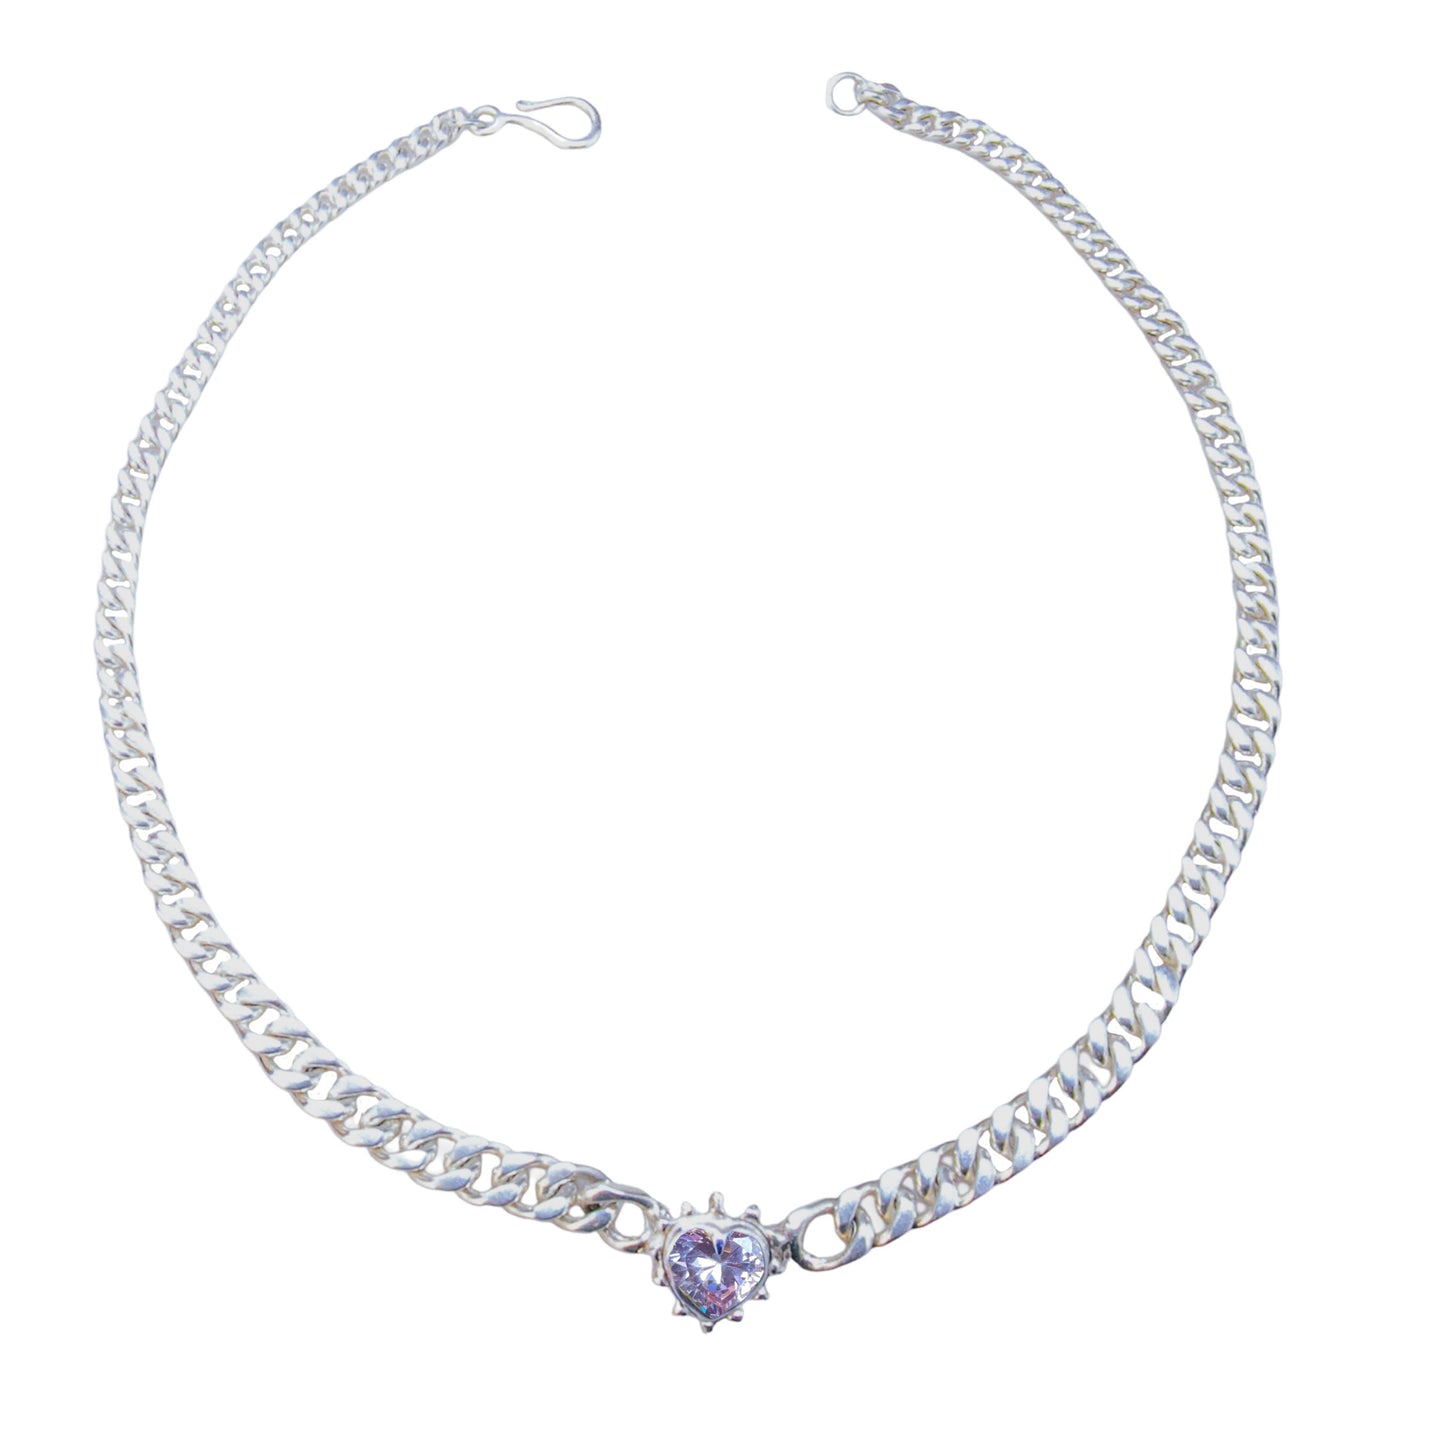 Limited Edition Lilac Chained Heart Necklace